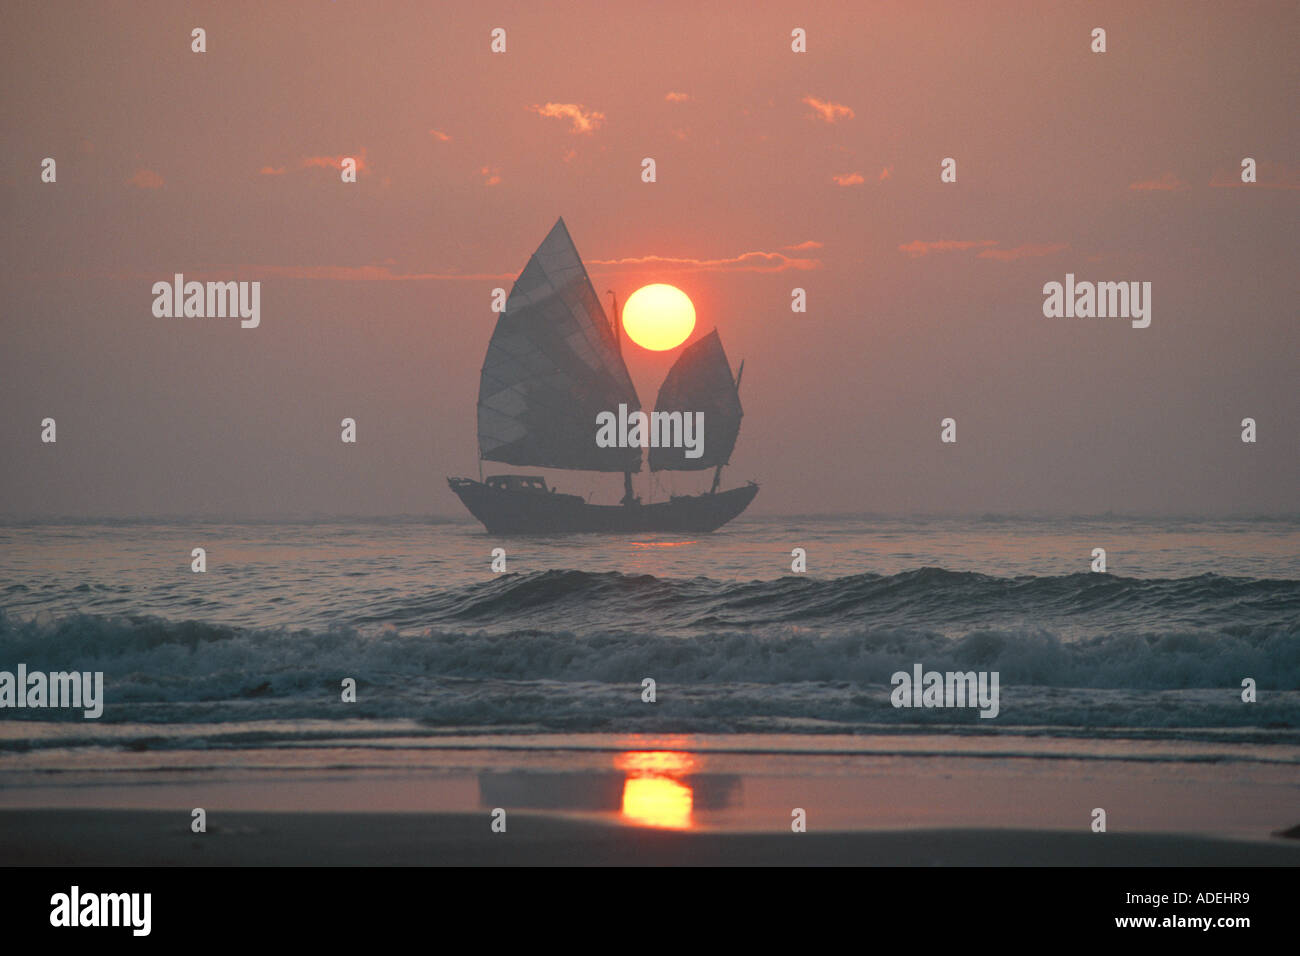 China. Guangdong (Canton). Shantou area. Dezhou Island. Early morning view of Chinese trading junk sailboat off the coast. Stock Photo